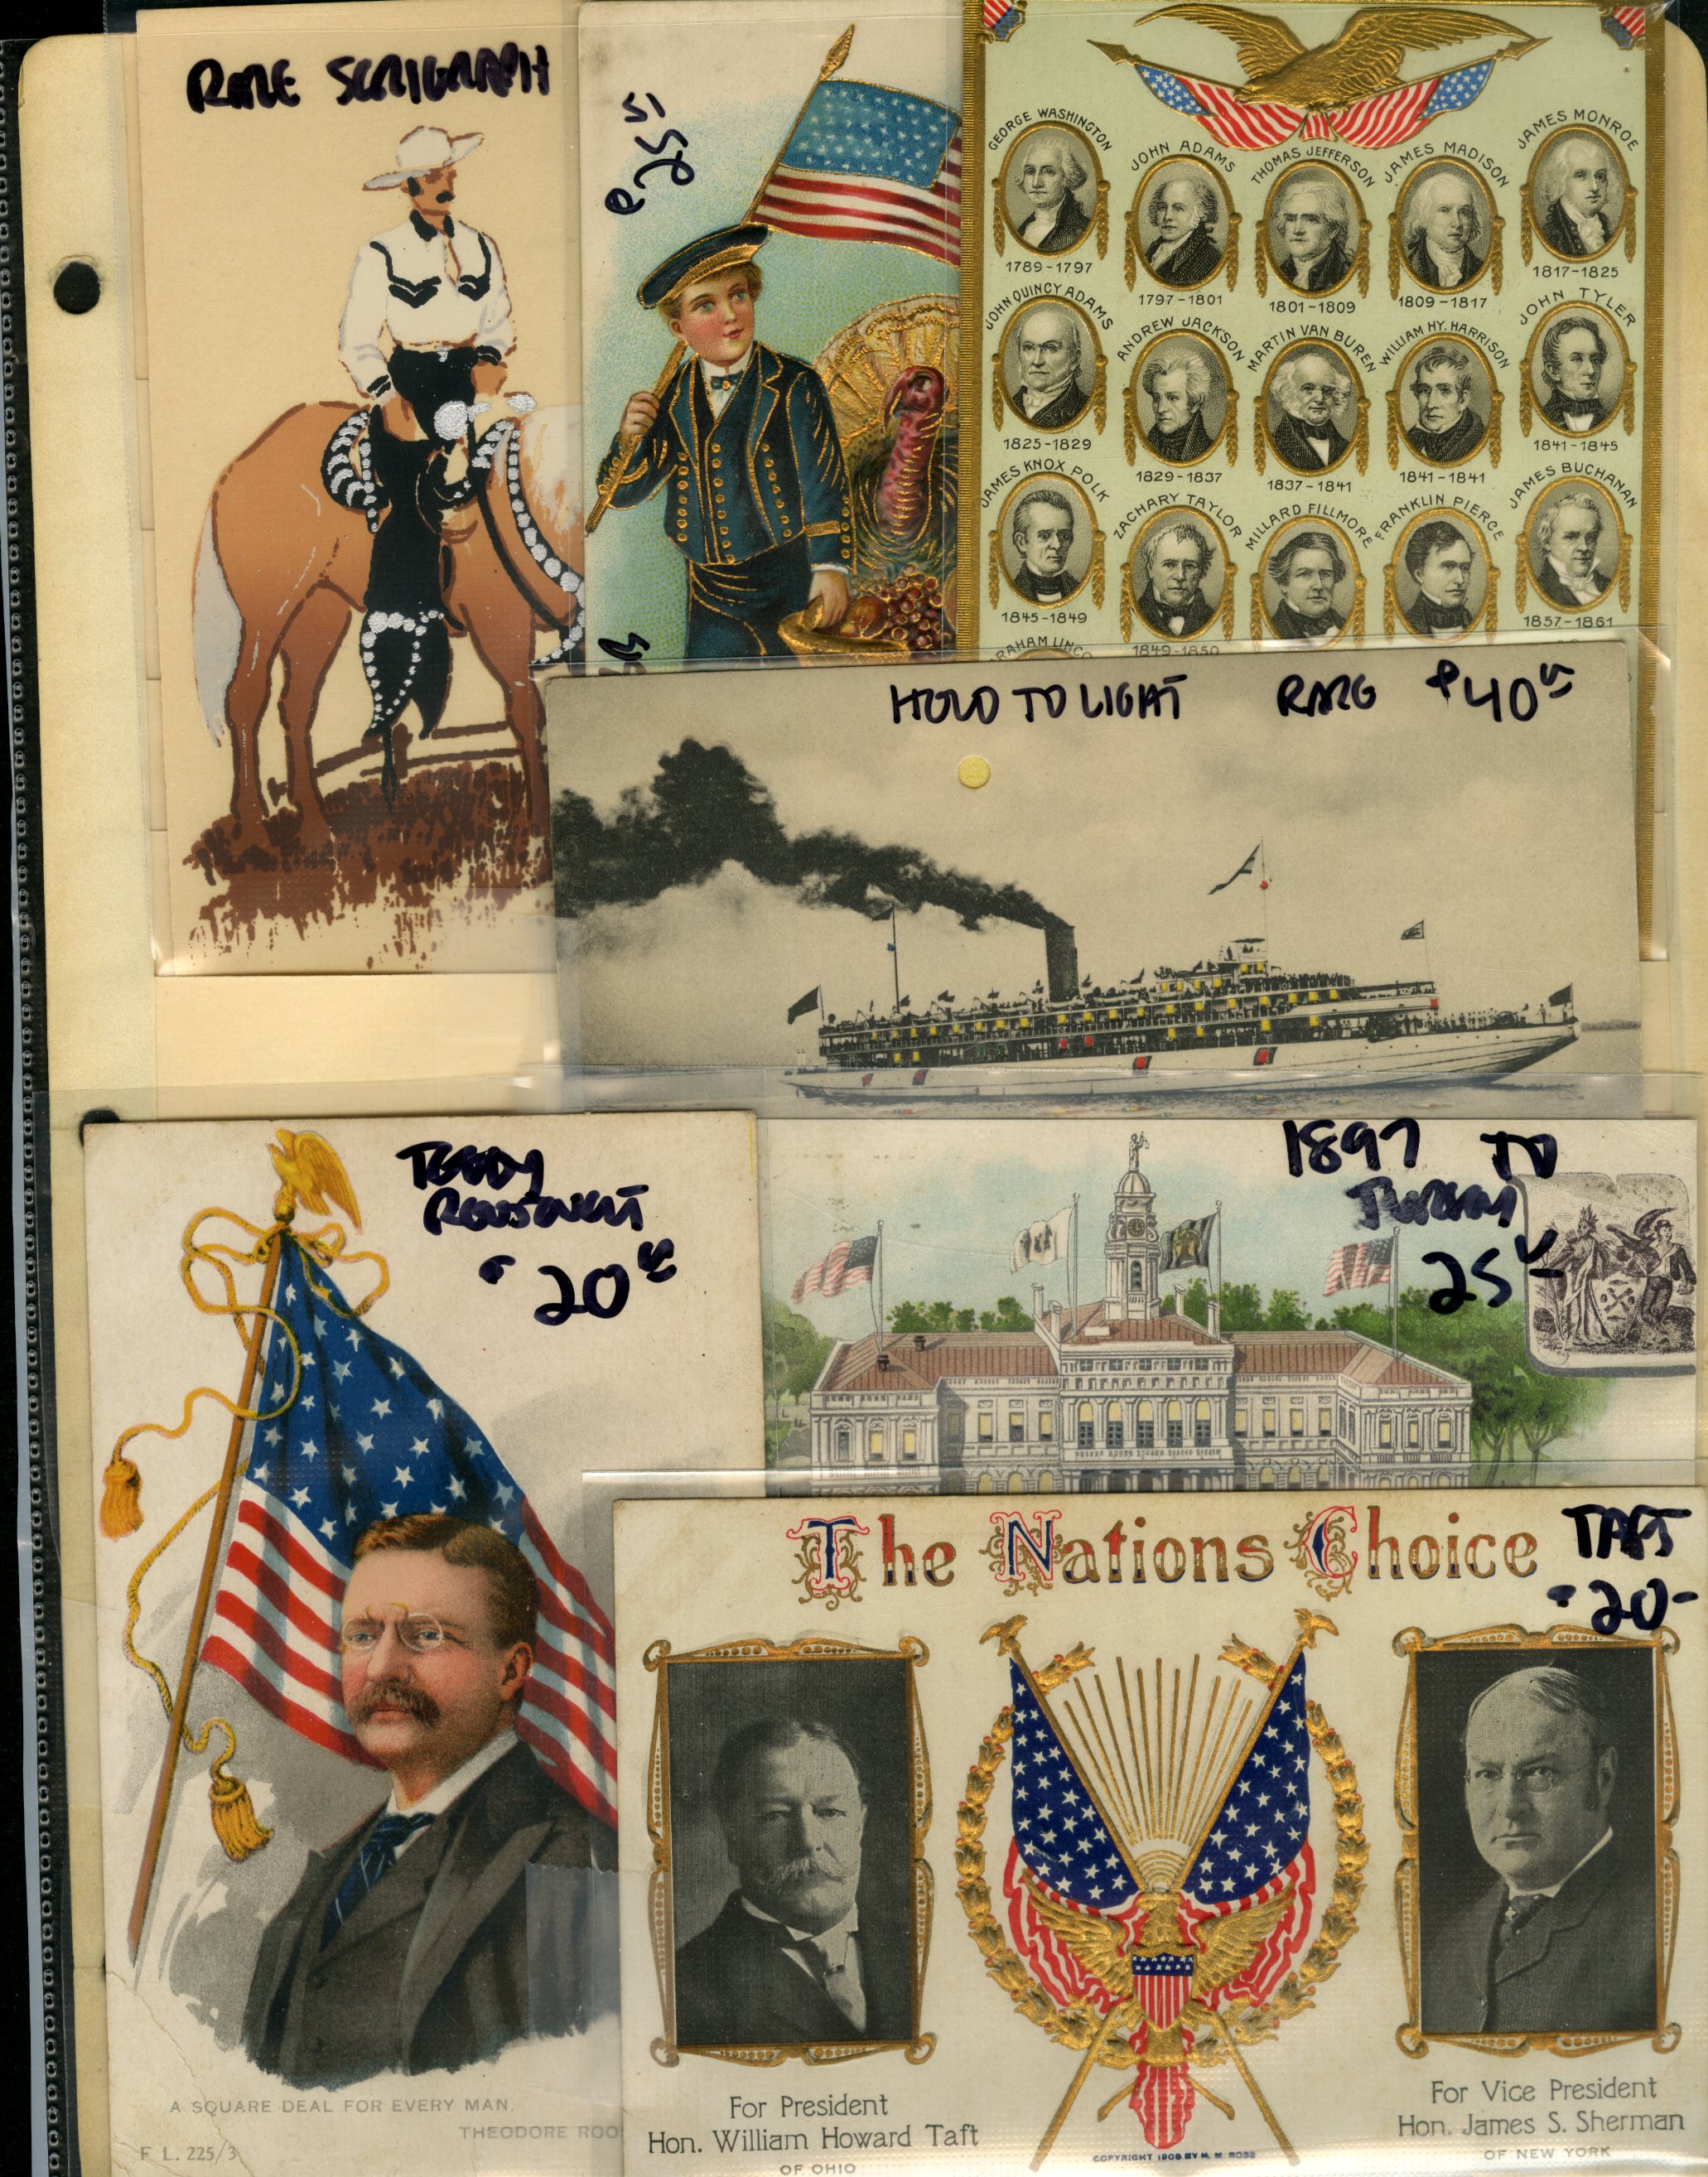 Lot 1399 - LARGE LOTS AND COLLECTIONS ESTONIA  -  Cherrystone Auctions U.S. & Worldwide Stamps & Postal History